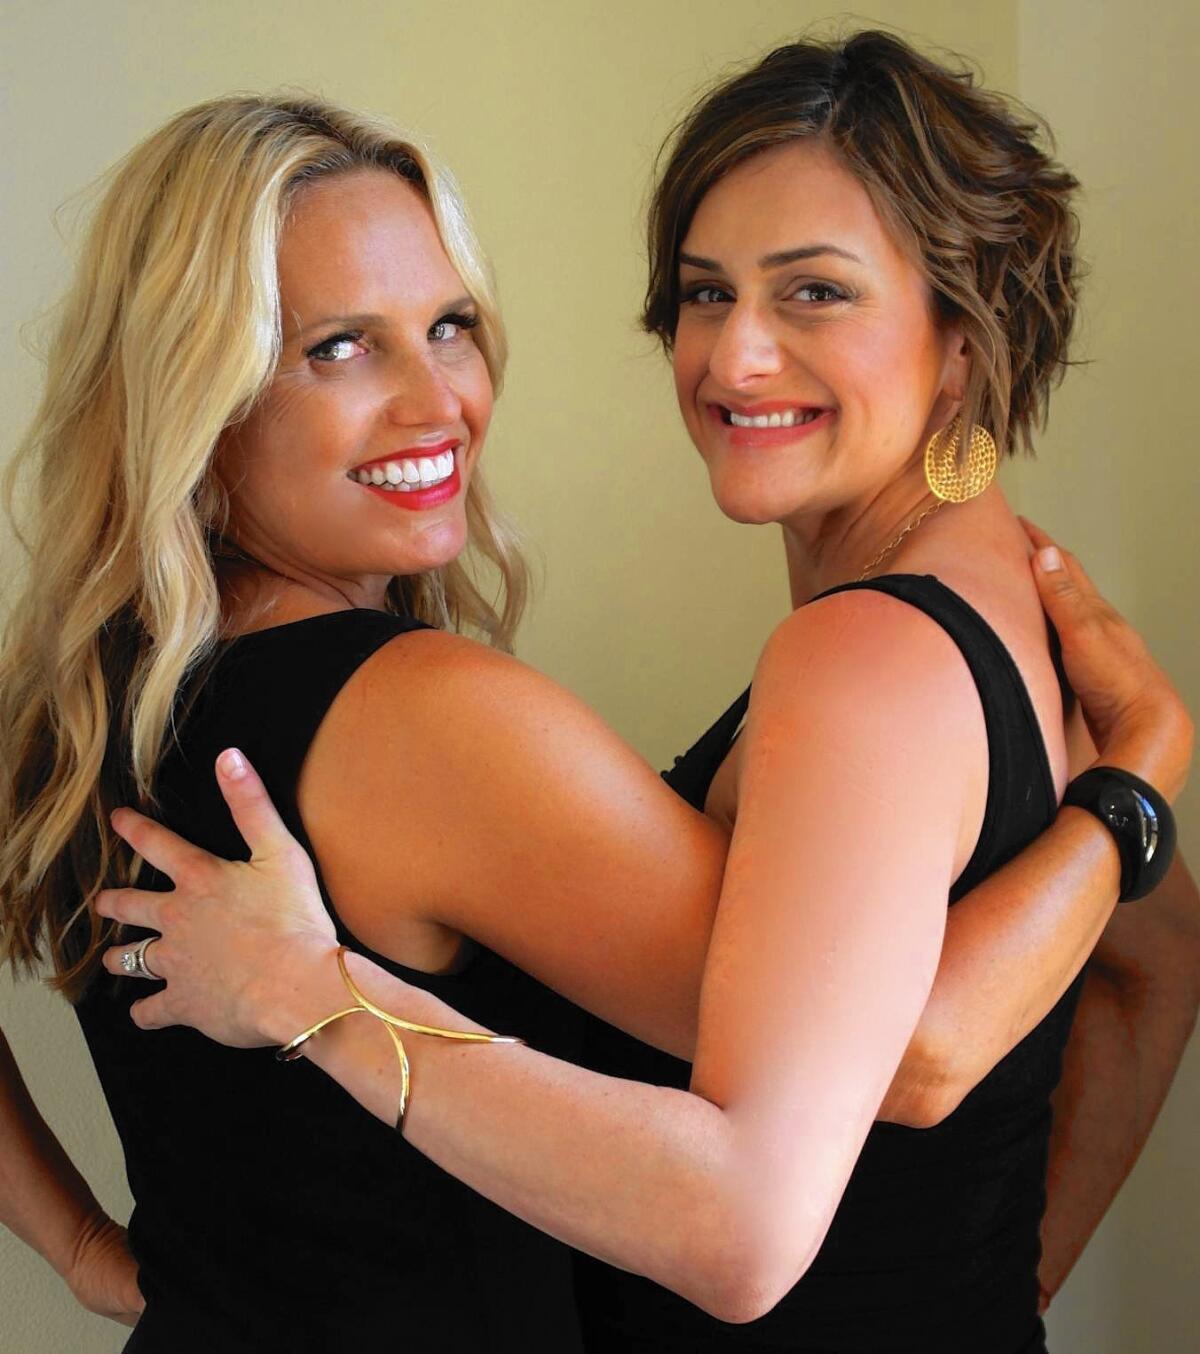 Joanne Forster and Kelly Lam created Mindful Her, a women's wellness event designed to educate, inspire and empower women to practice a healthy lifestyle. The convention is Oct. 24.